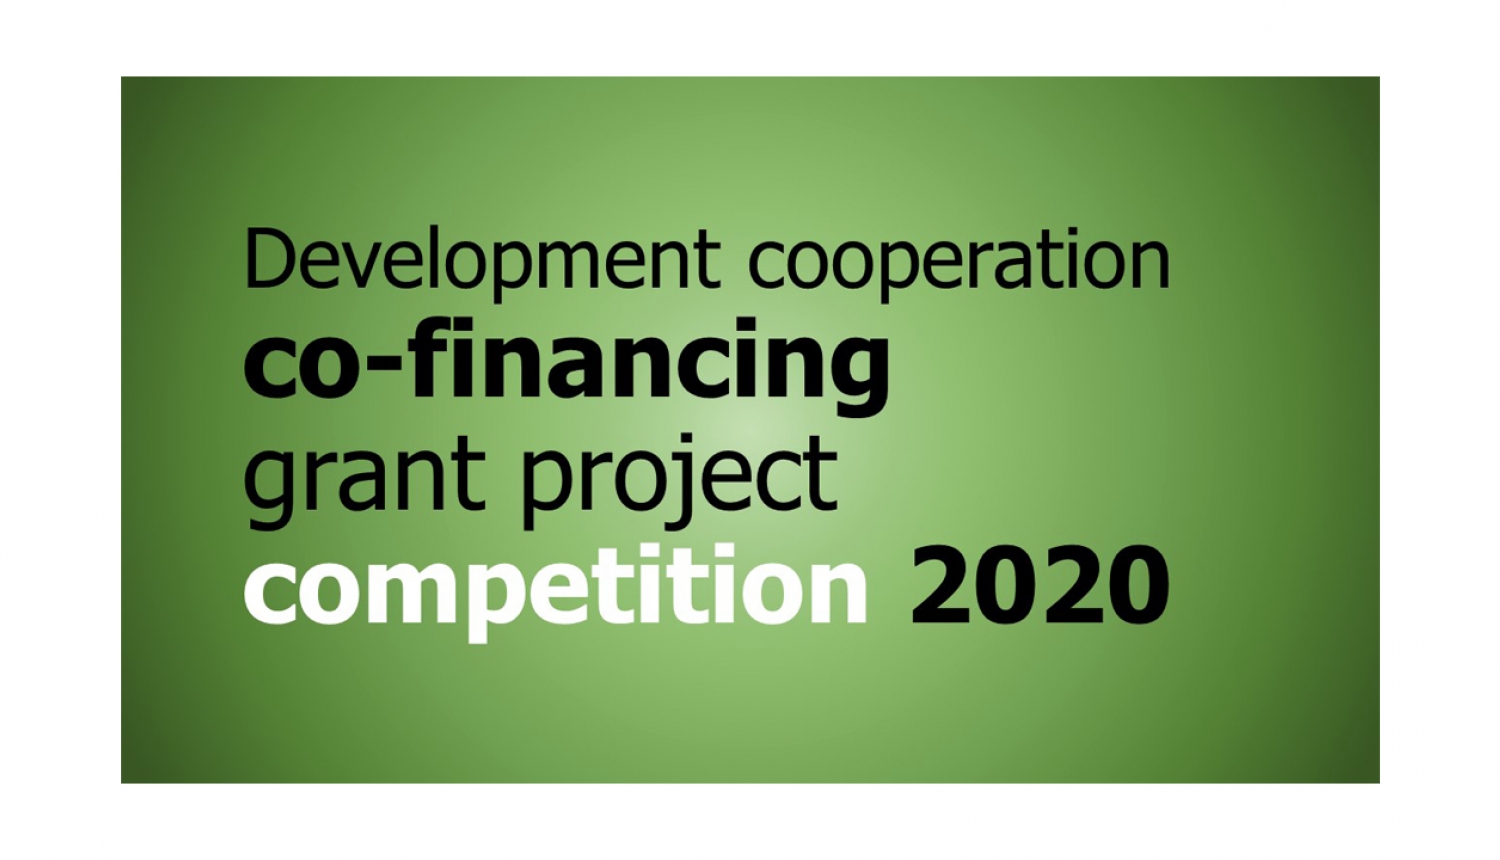 Grant competition launched for the co-financing of development cooperation and global education projects